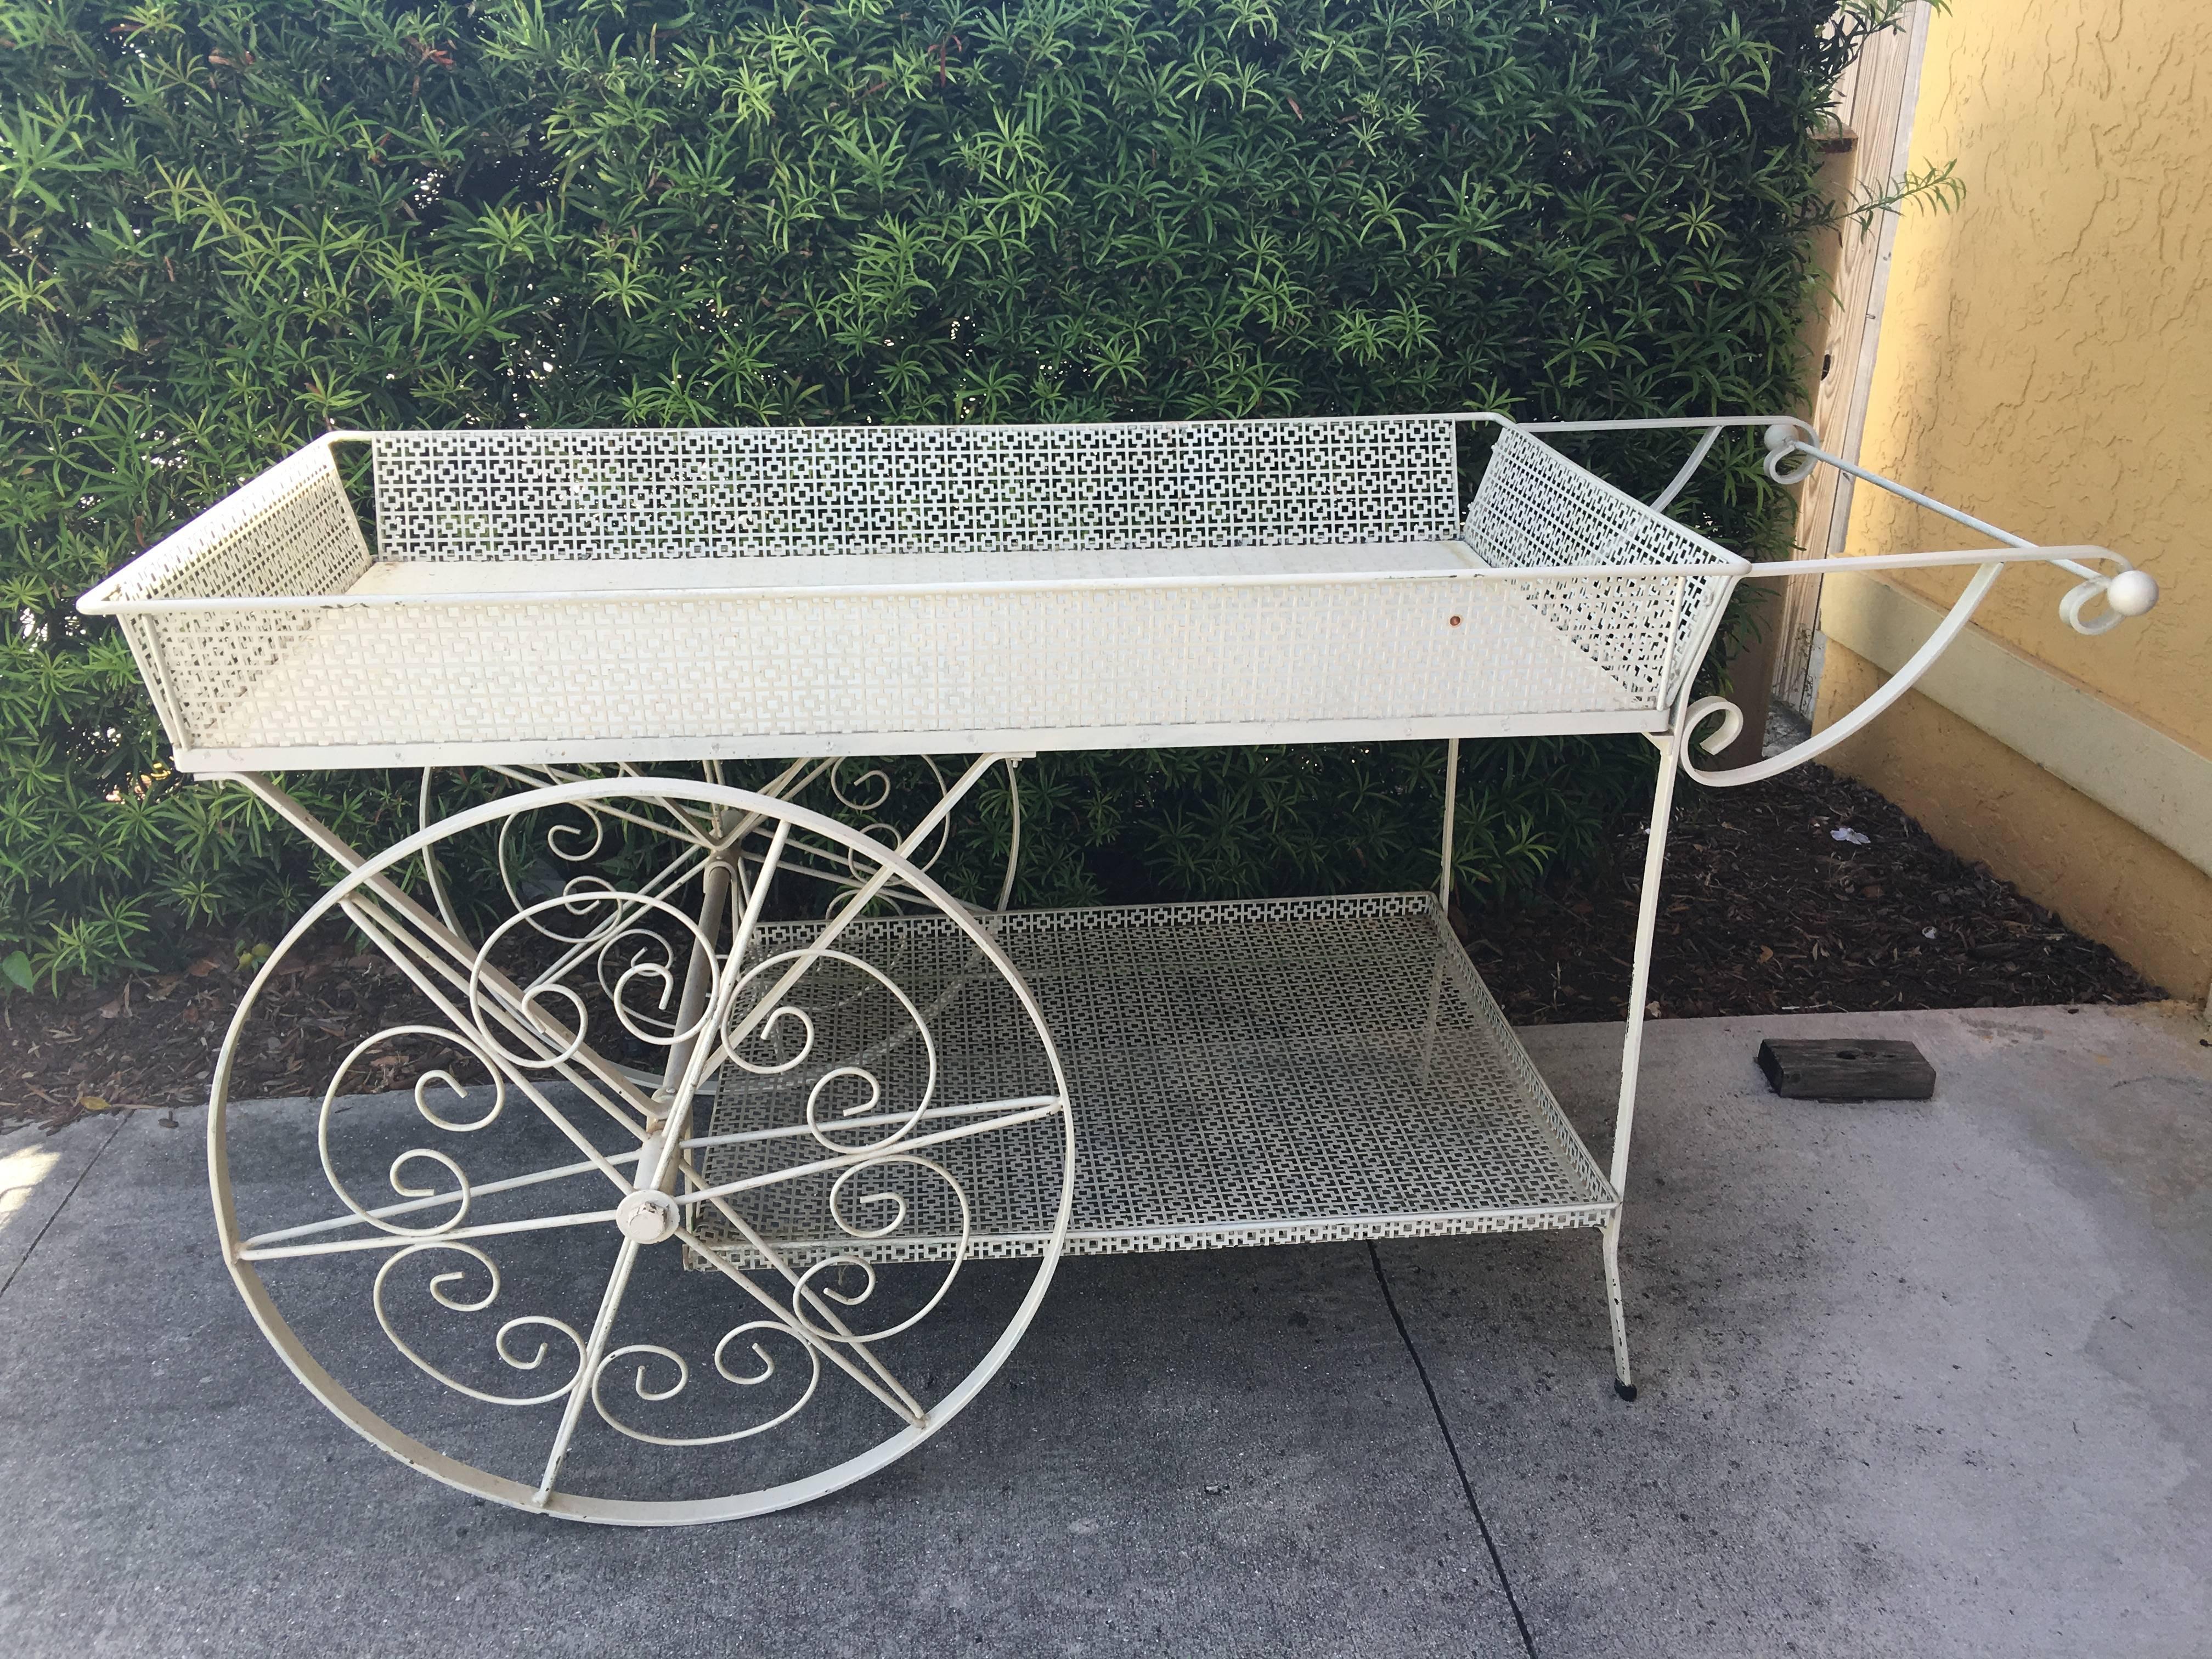 Charming vintage flower cart with detachable upper rack. In painted white this garden cart has decorative pierced metal decoration and large wheels. Height to top of rack is 64